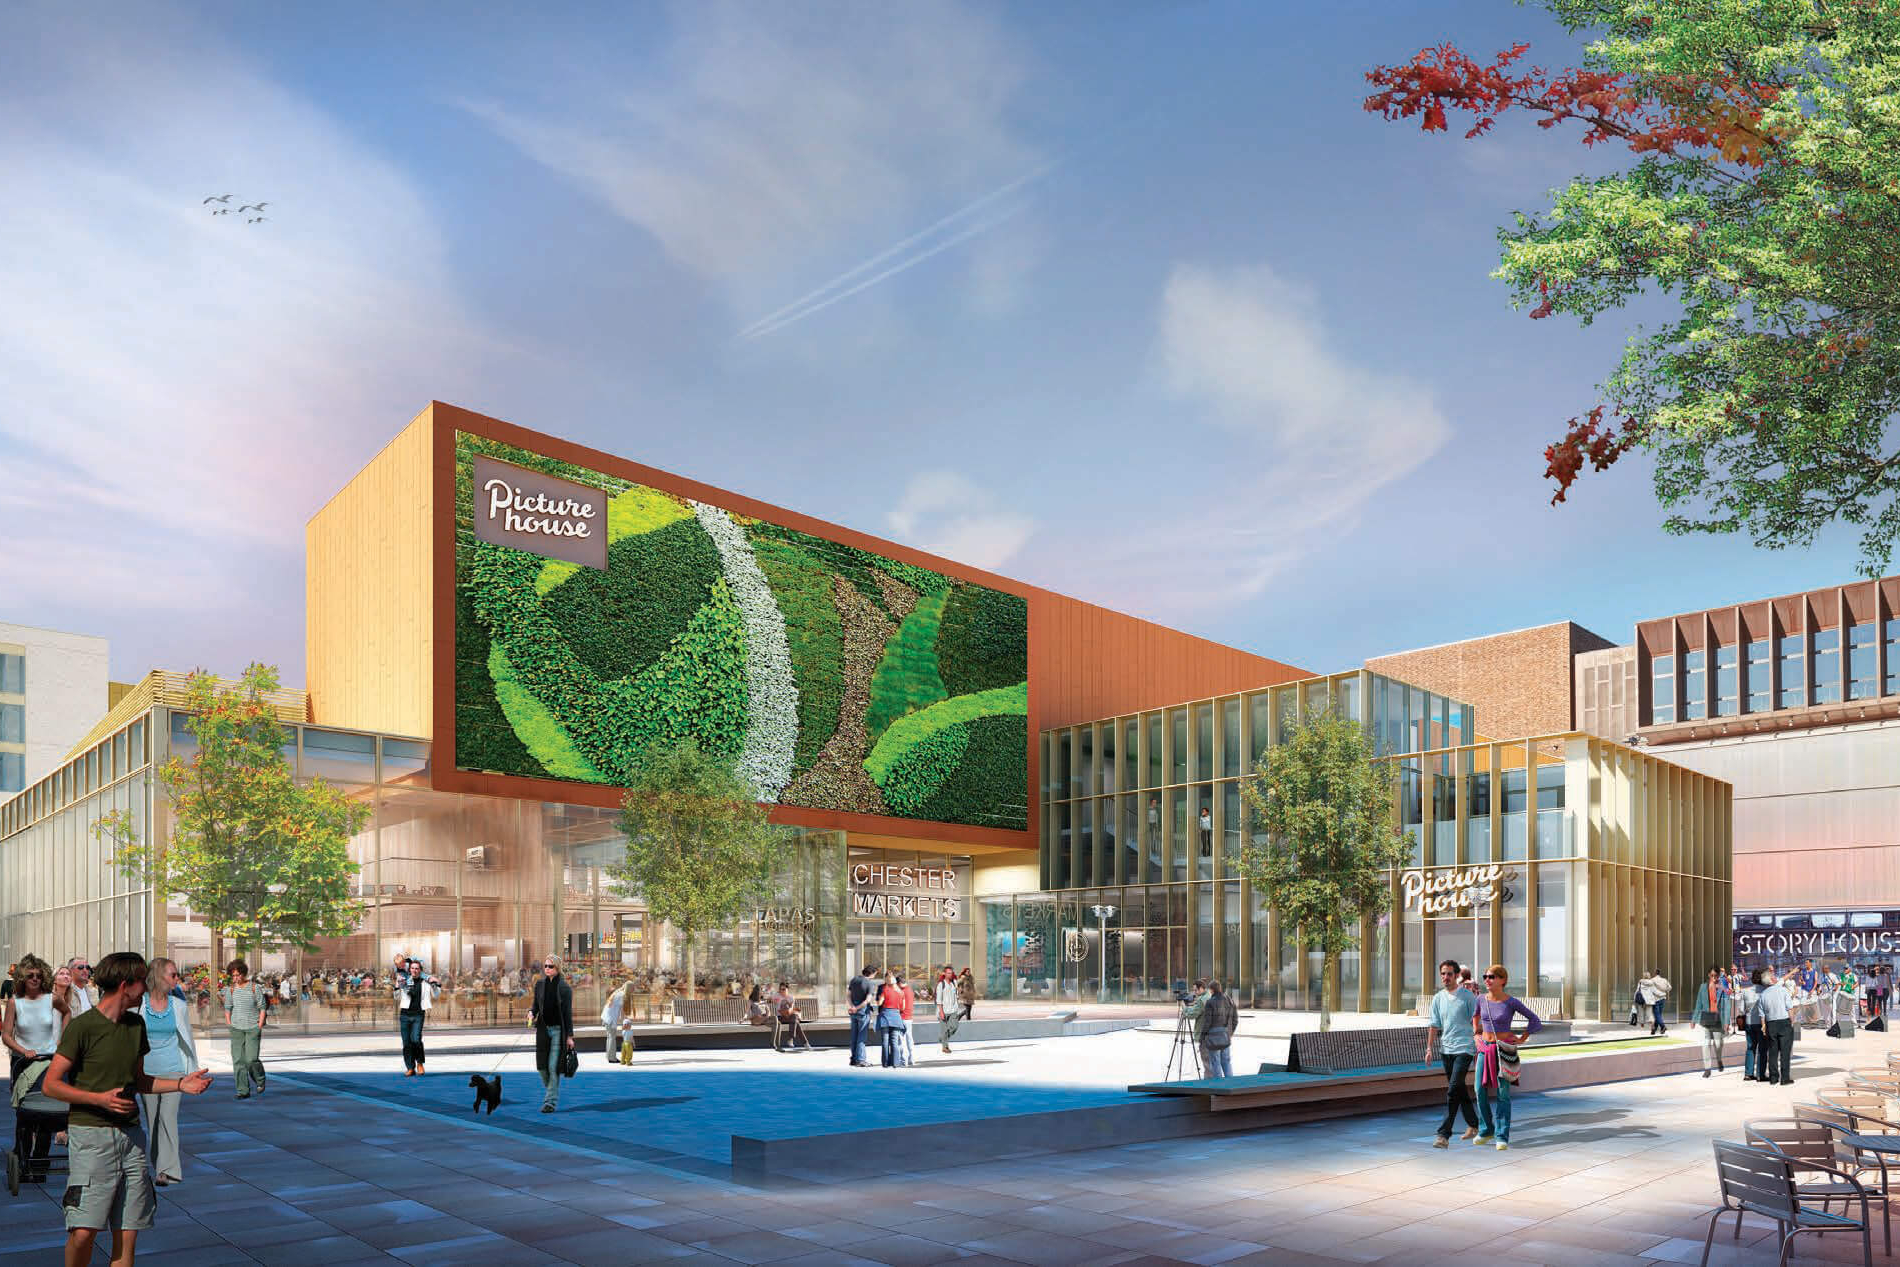 CGI of the some of the green walls at Chester Northgate